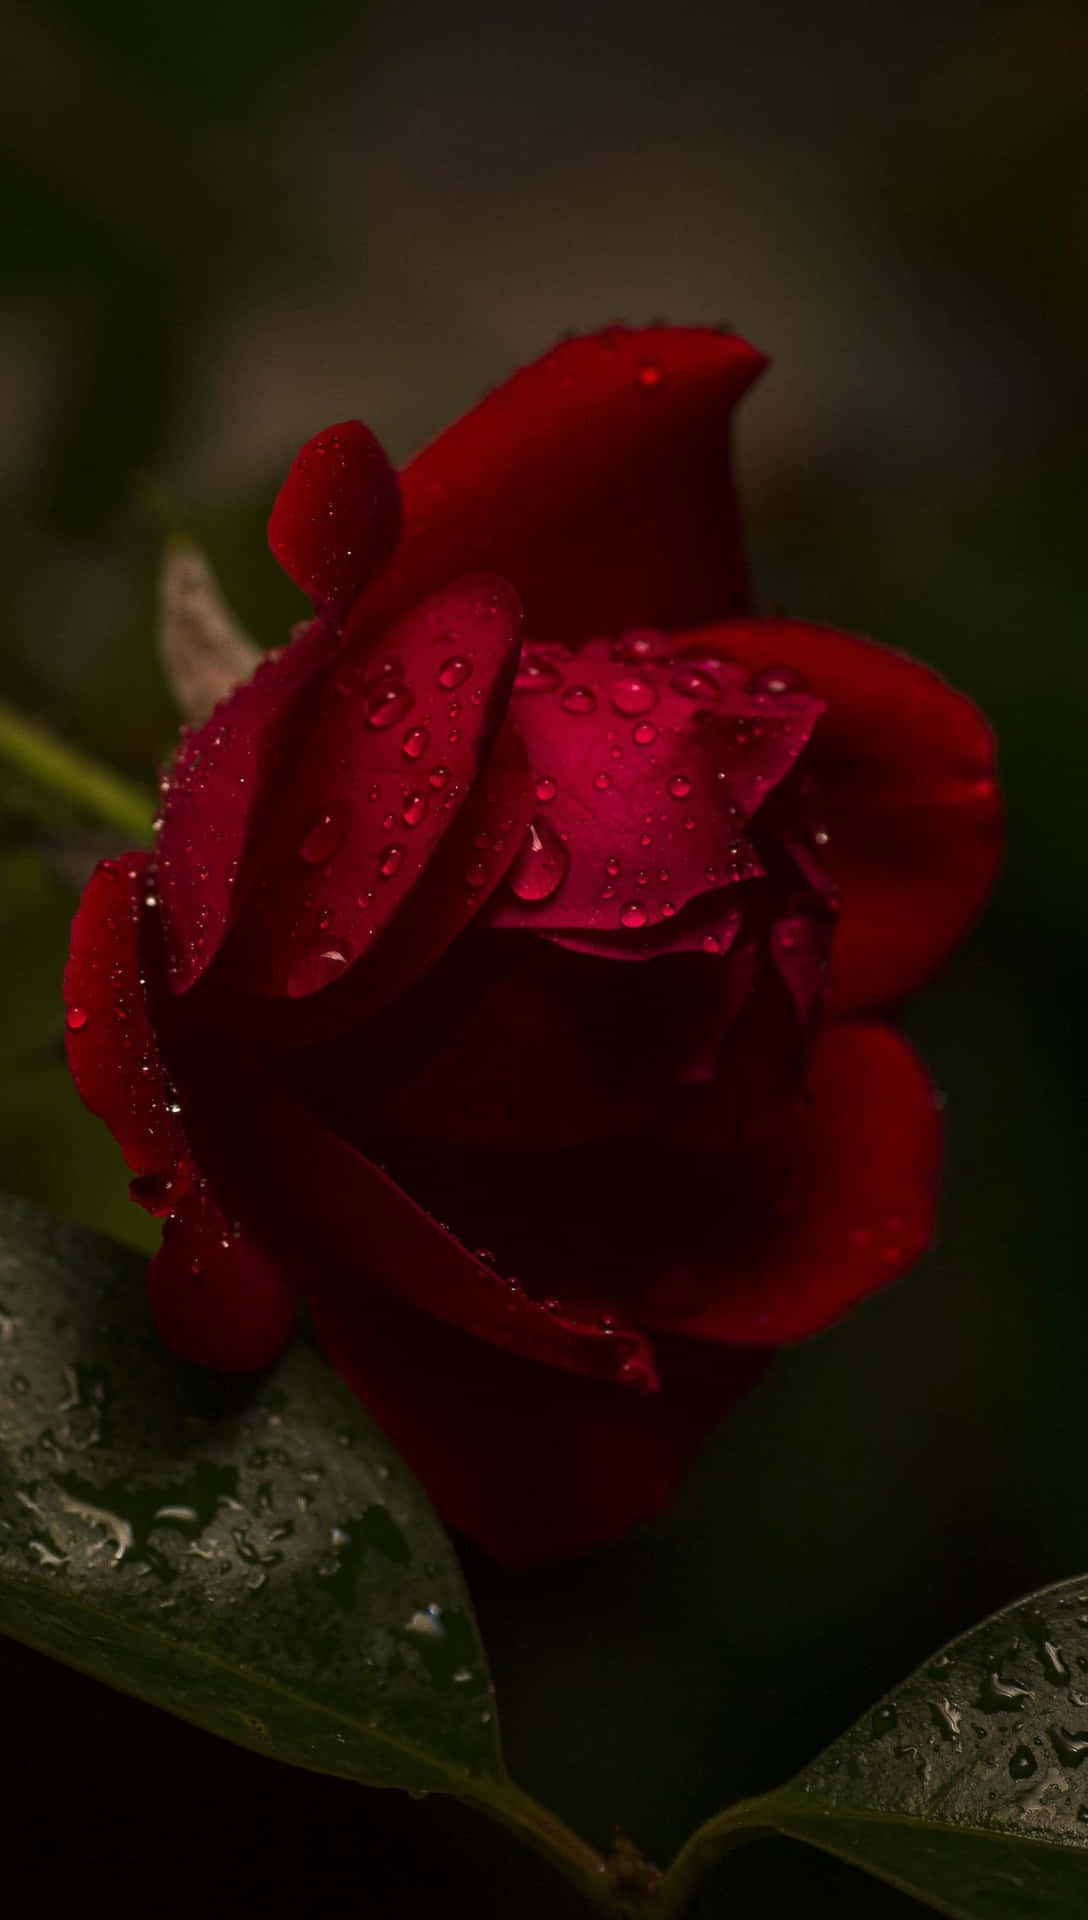 red rose with water drops wallpaper